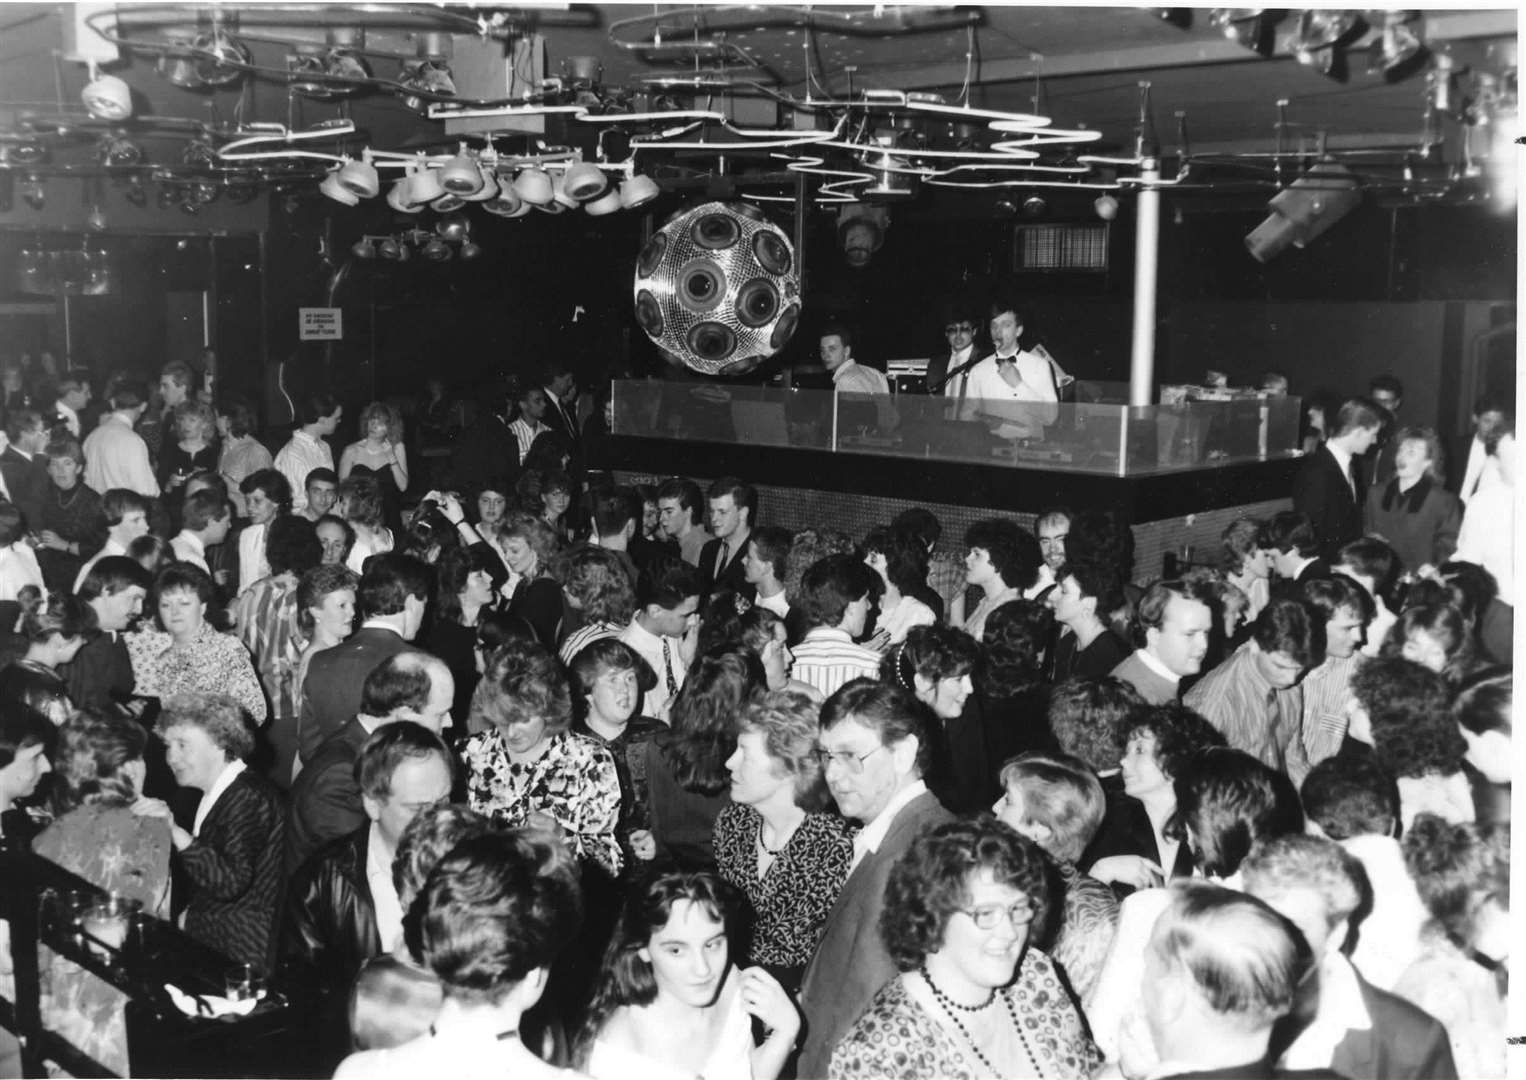 Leysdown nightclub Stage 3 in 1988. Picture: Kevin Coombs